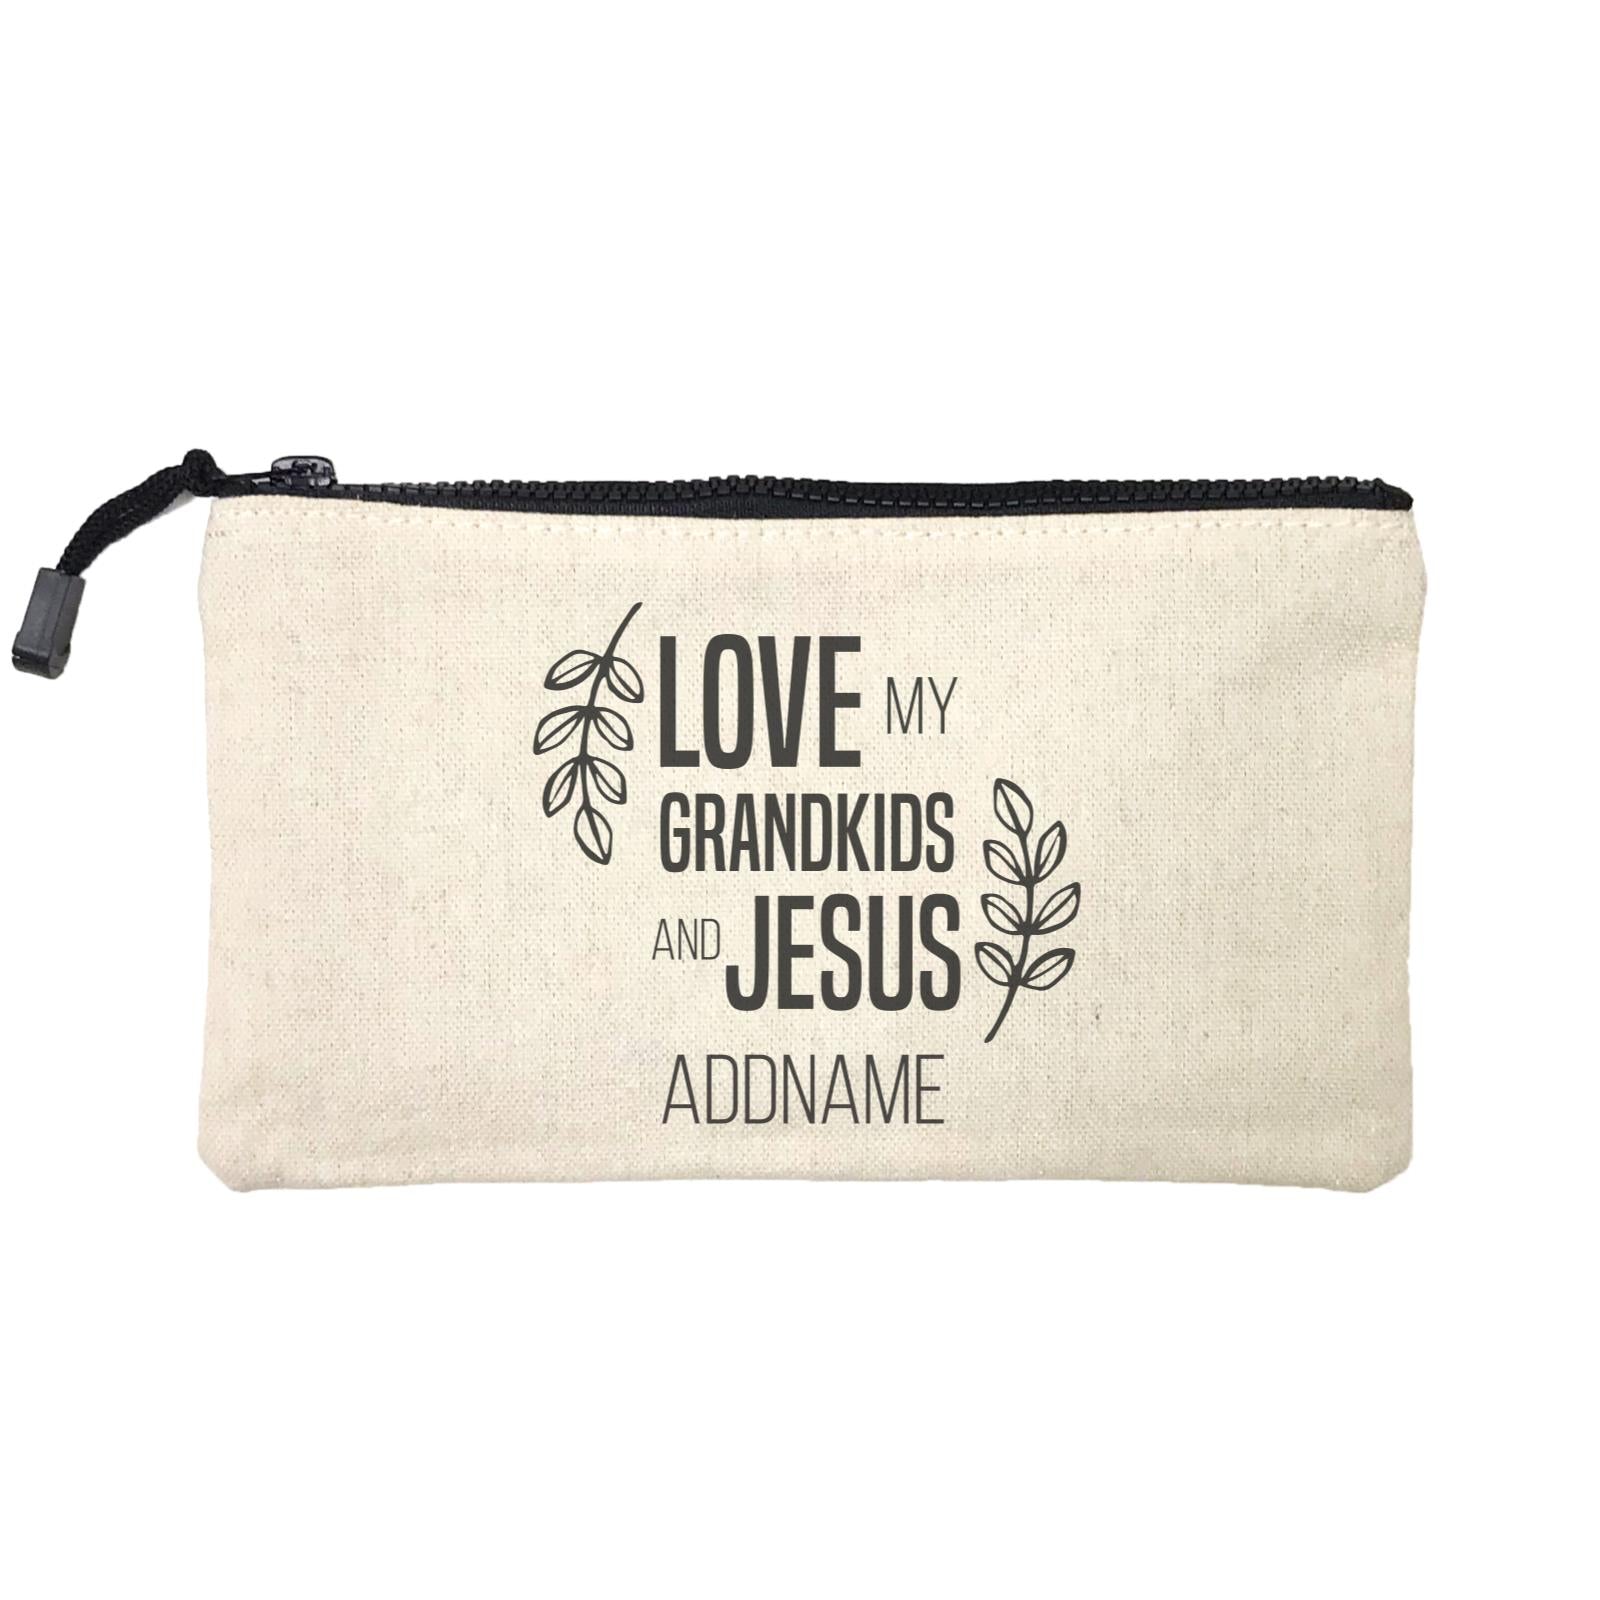 Christian Series Love My Grandkids And Jesus Addname Mini Accessories Stationery Pouch